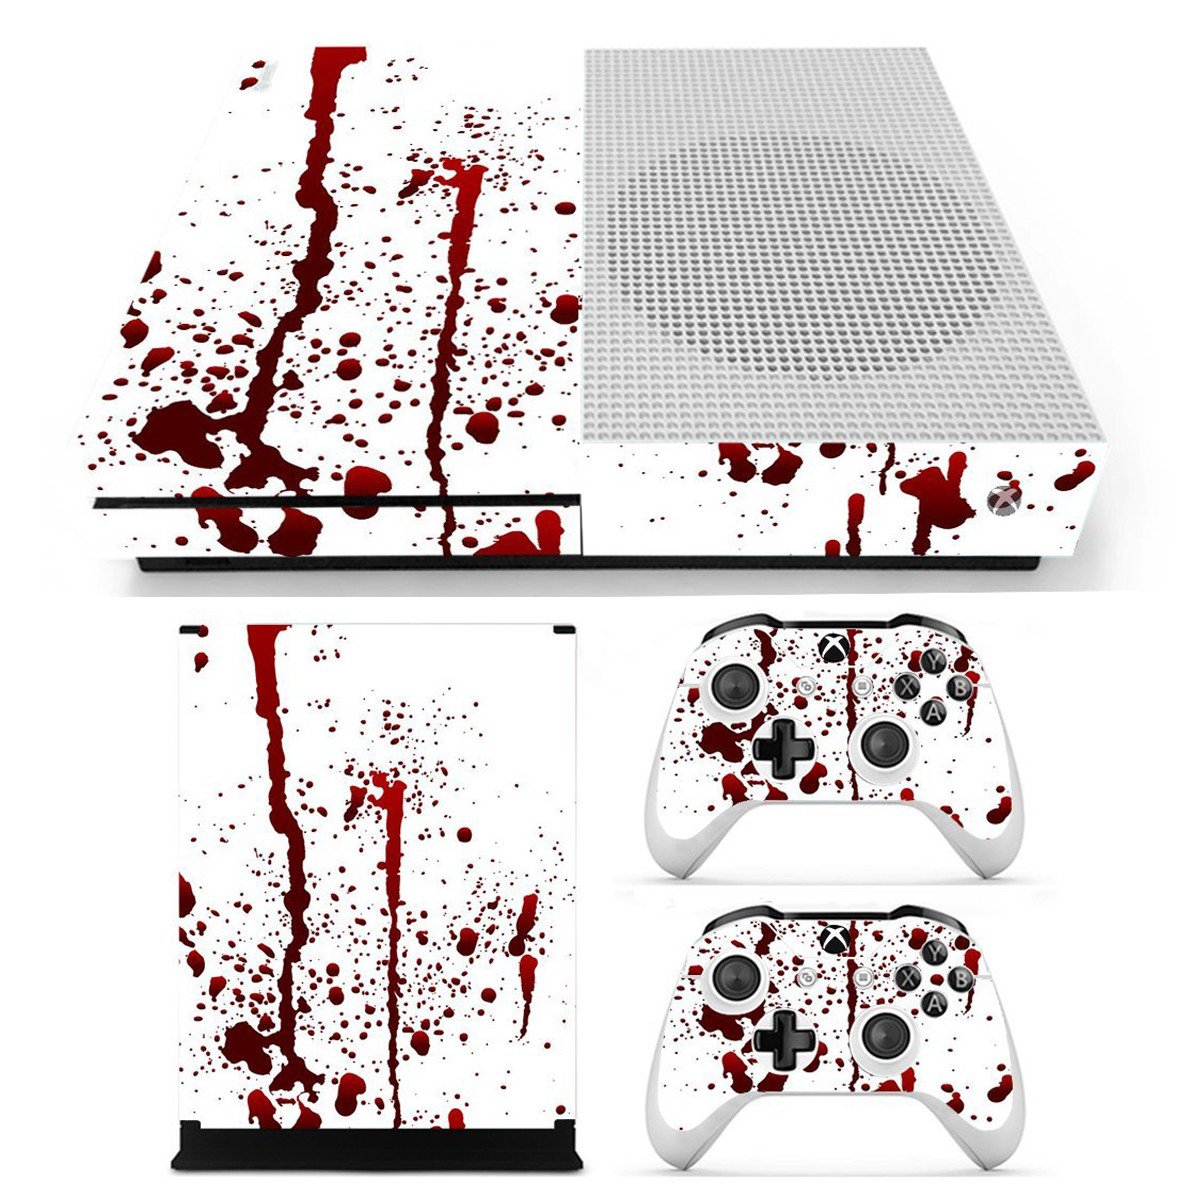 Bloody Skin Decals Stickers Cover for Xbox One S Game Console & 2 Controllers 2